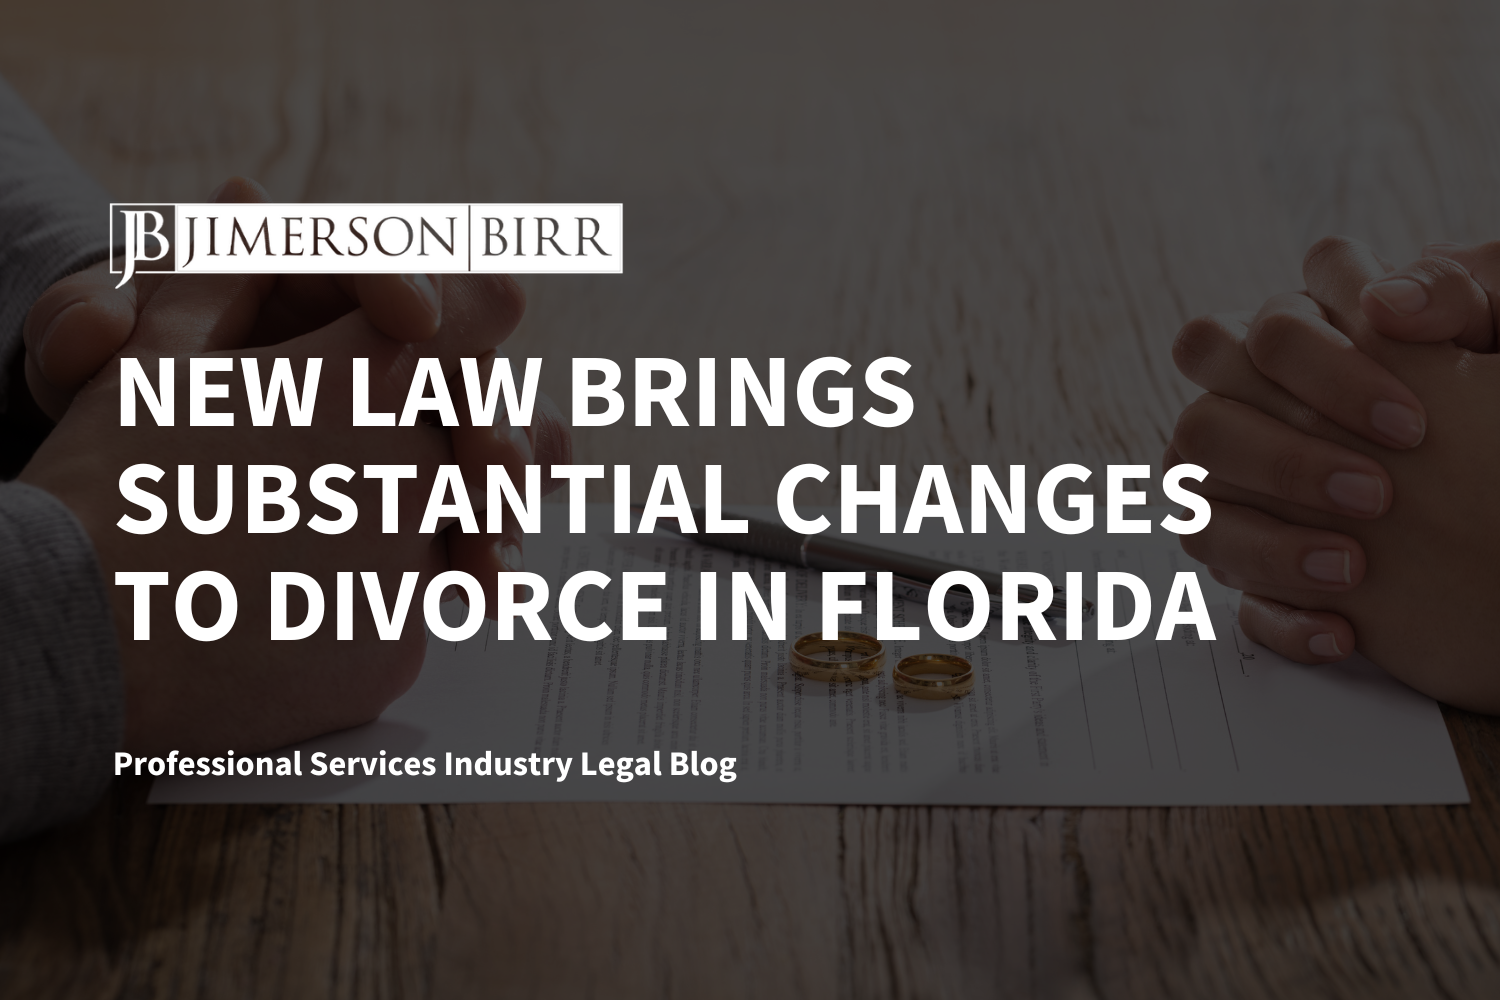 New Law Brings Substantial Changes to Divorce in Florida